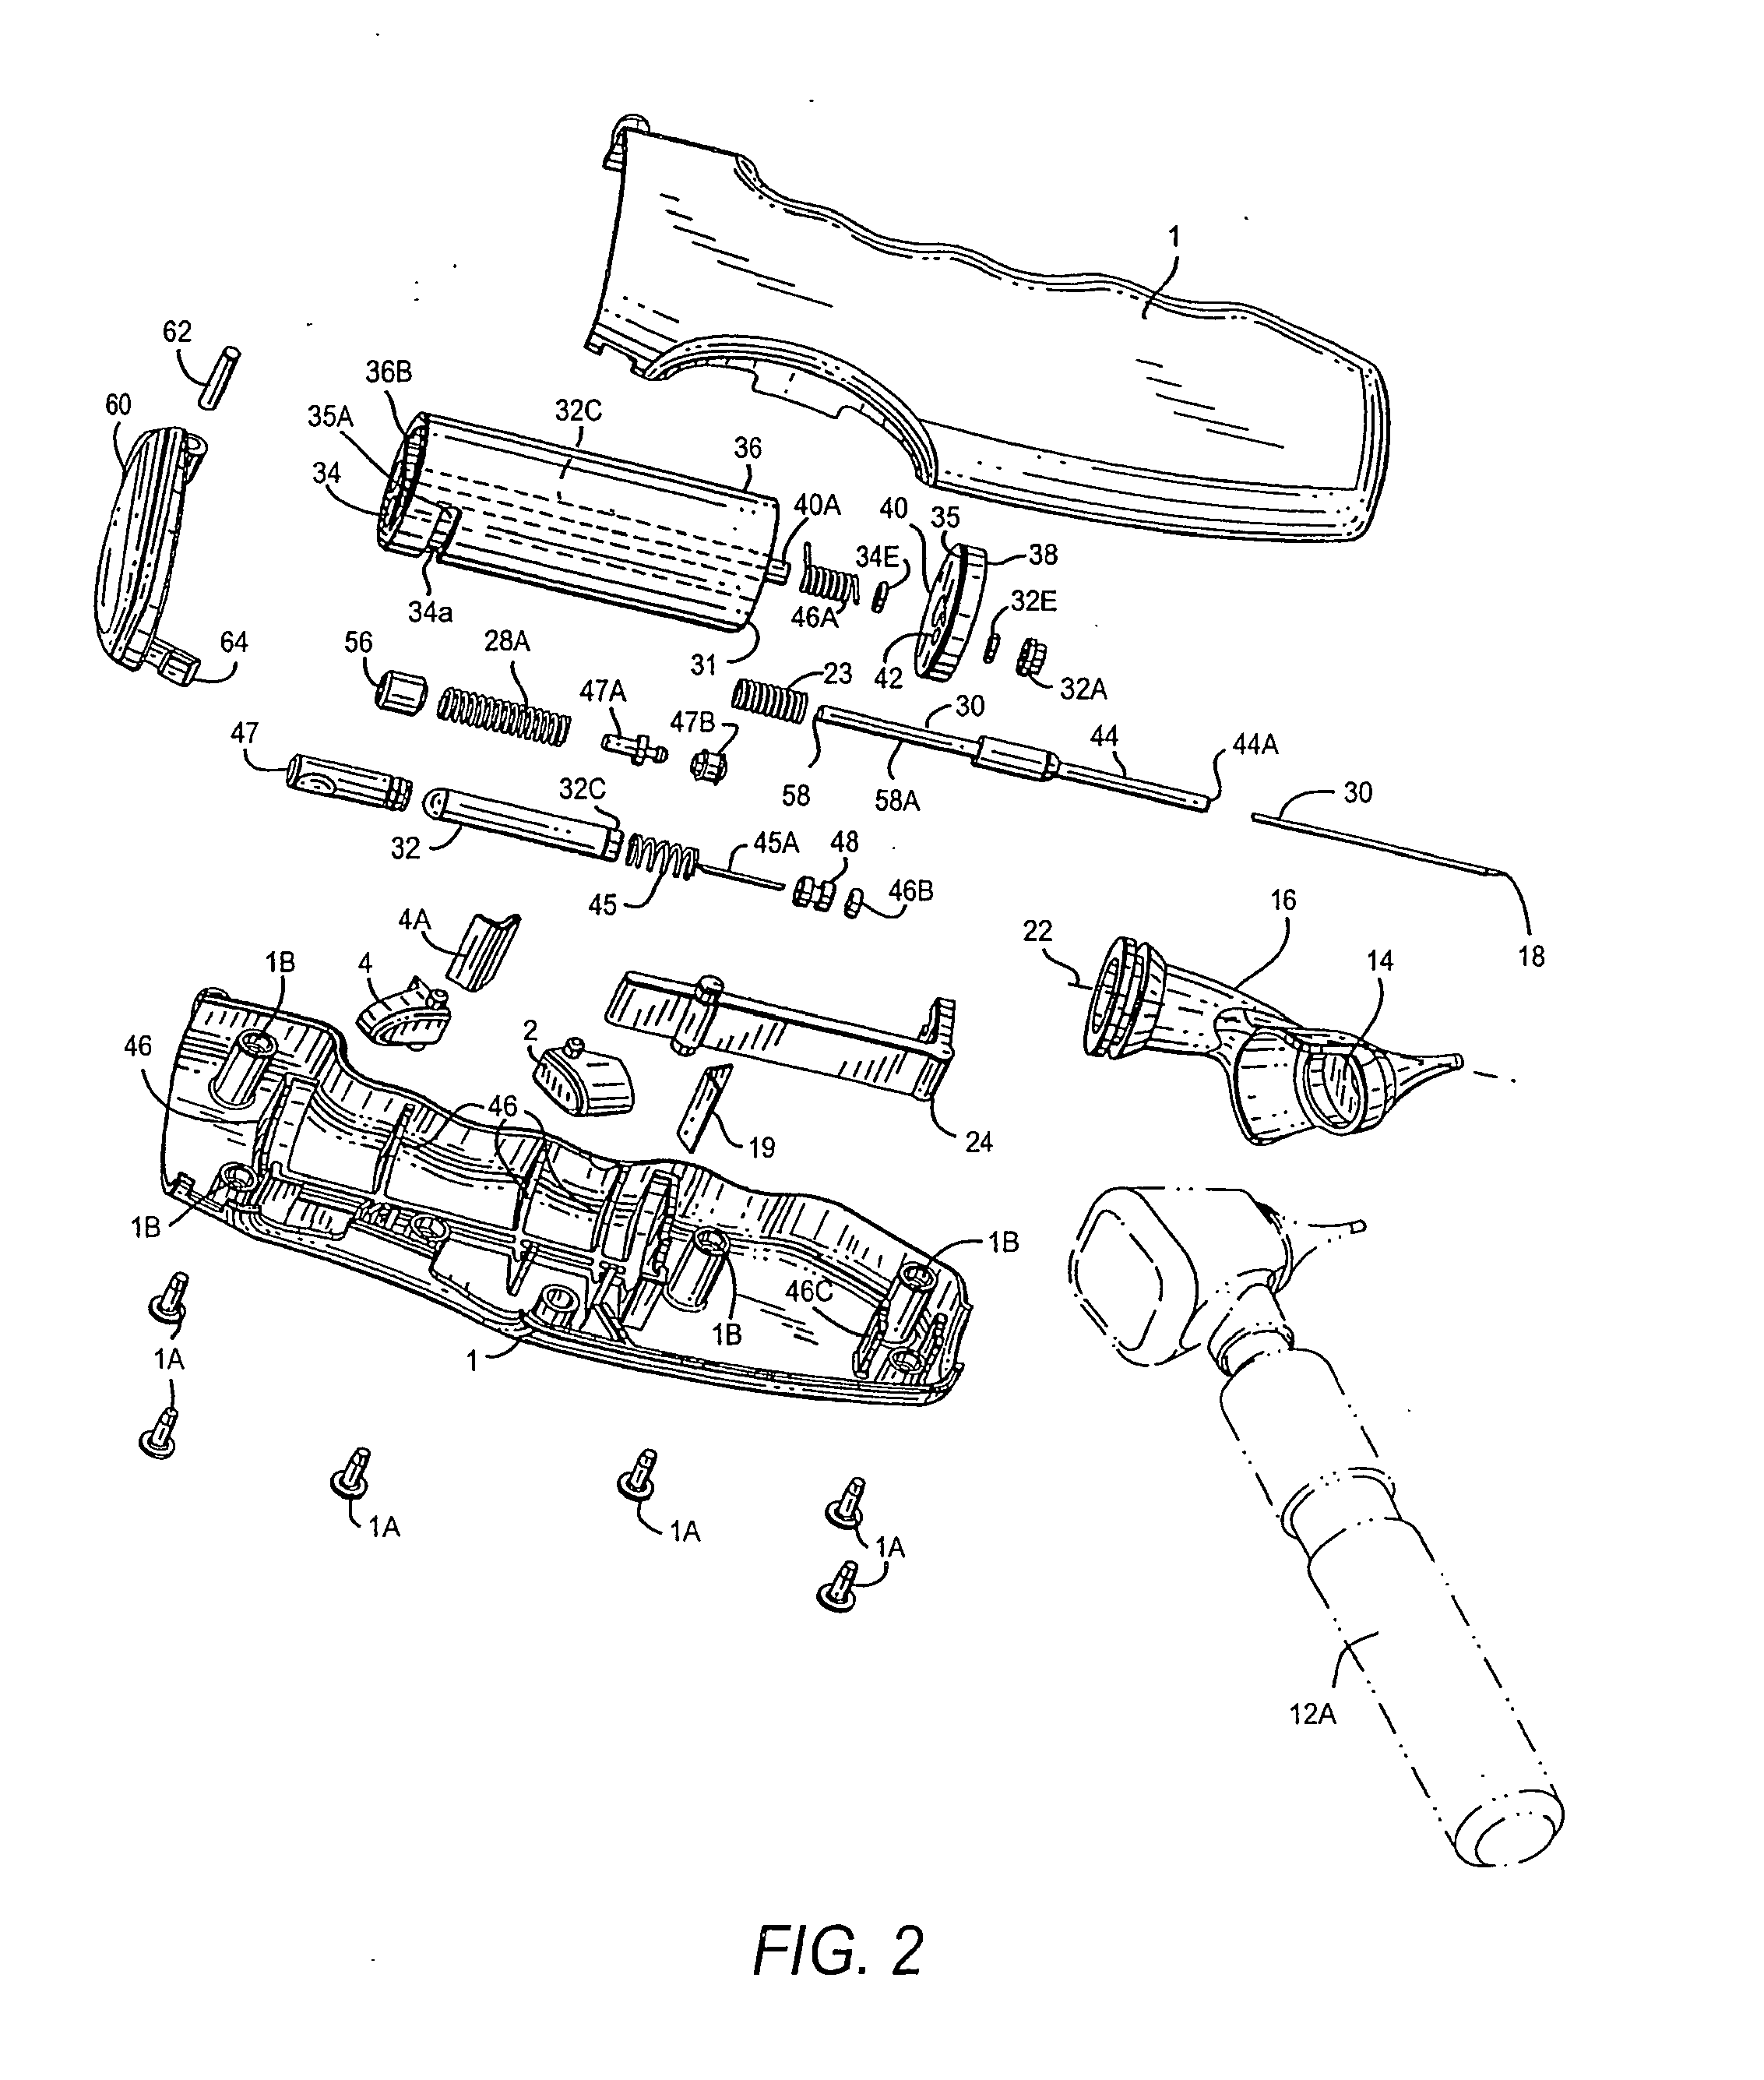 Combined otic and medication dispenser and method for treating otic infections